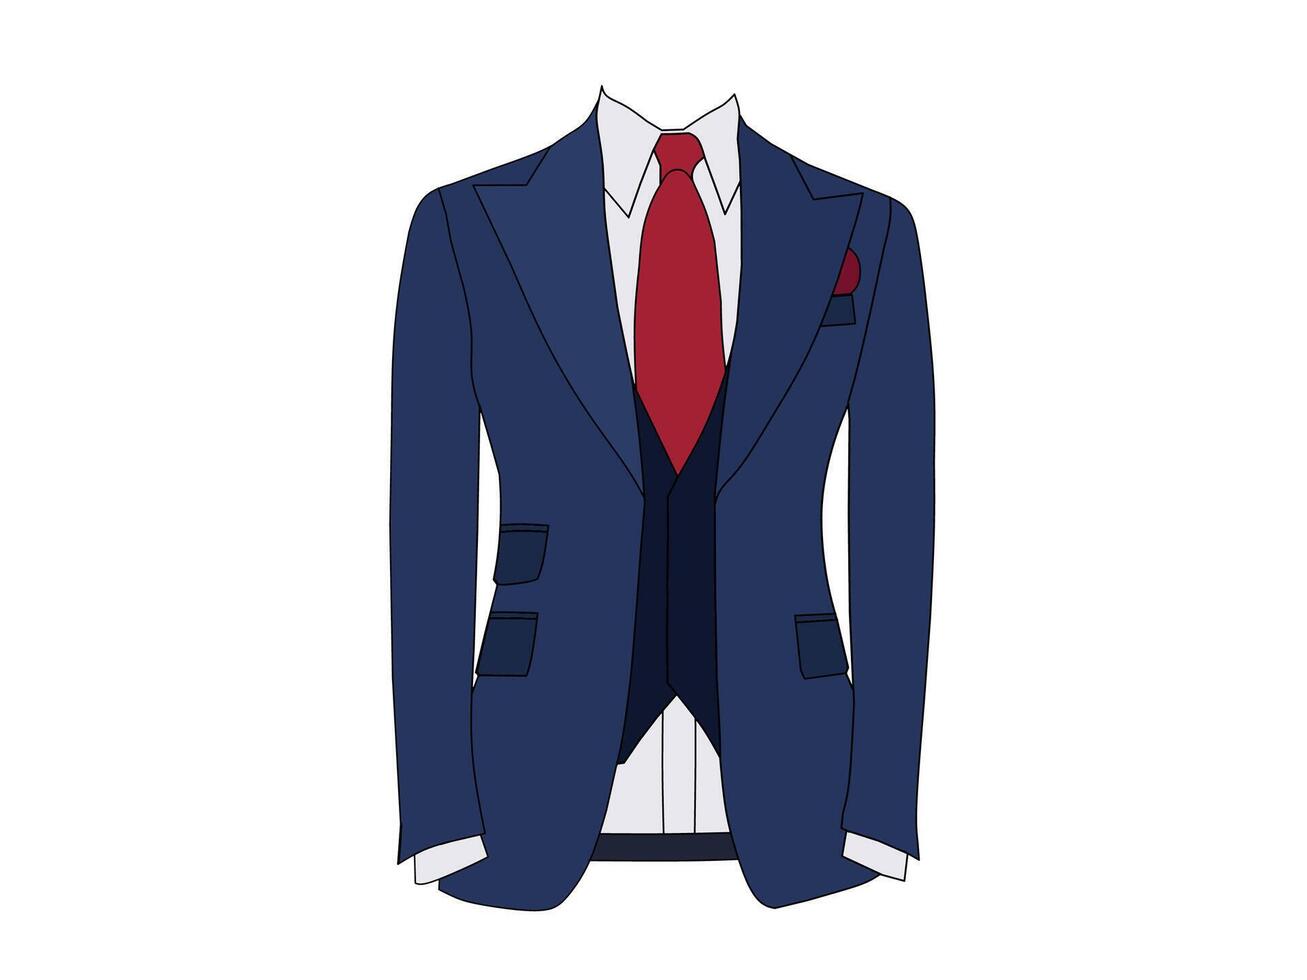 Men's Tuxedo suit vector with dark blue color and red tie.